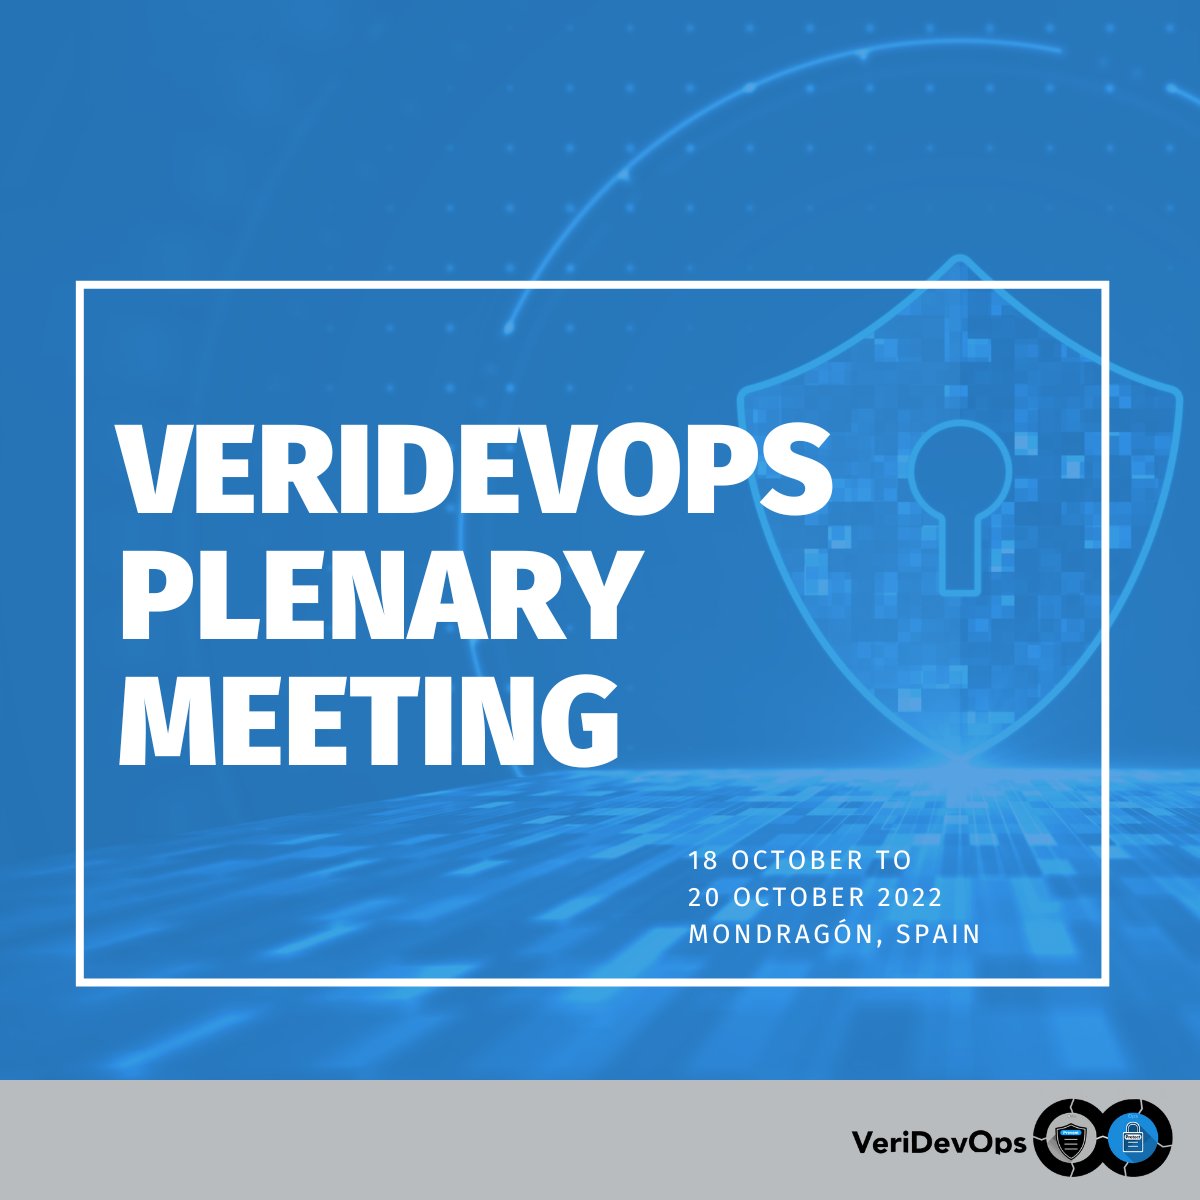 🤩 The #VeriDevOps plenary meeting starts tomorrow in Mondragón (Spain)! We will open this face to face meeting by presenting and discussing the status of the project, but there will also time for an exciting #ResearchWorkshop on Thursday 20th, don't miss it!

#VeriDevOpsProject